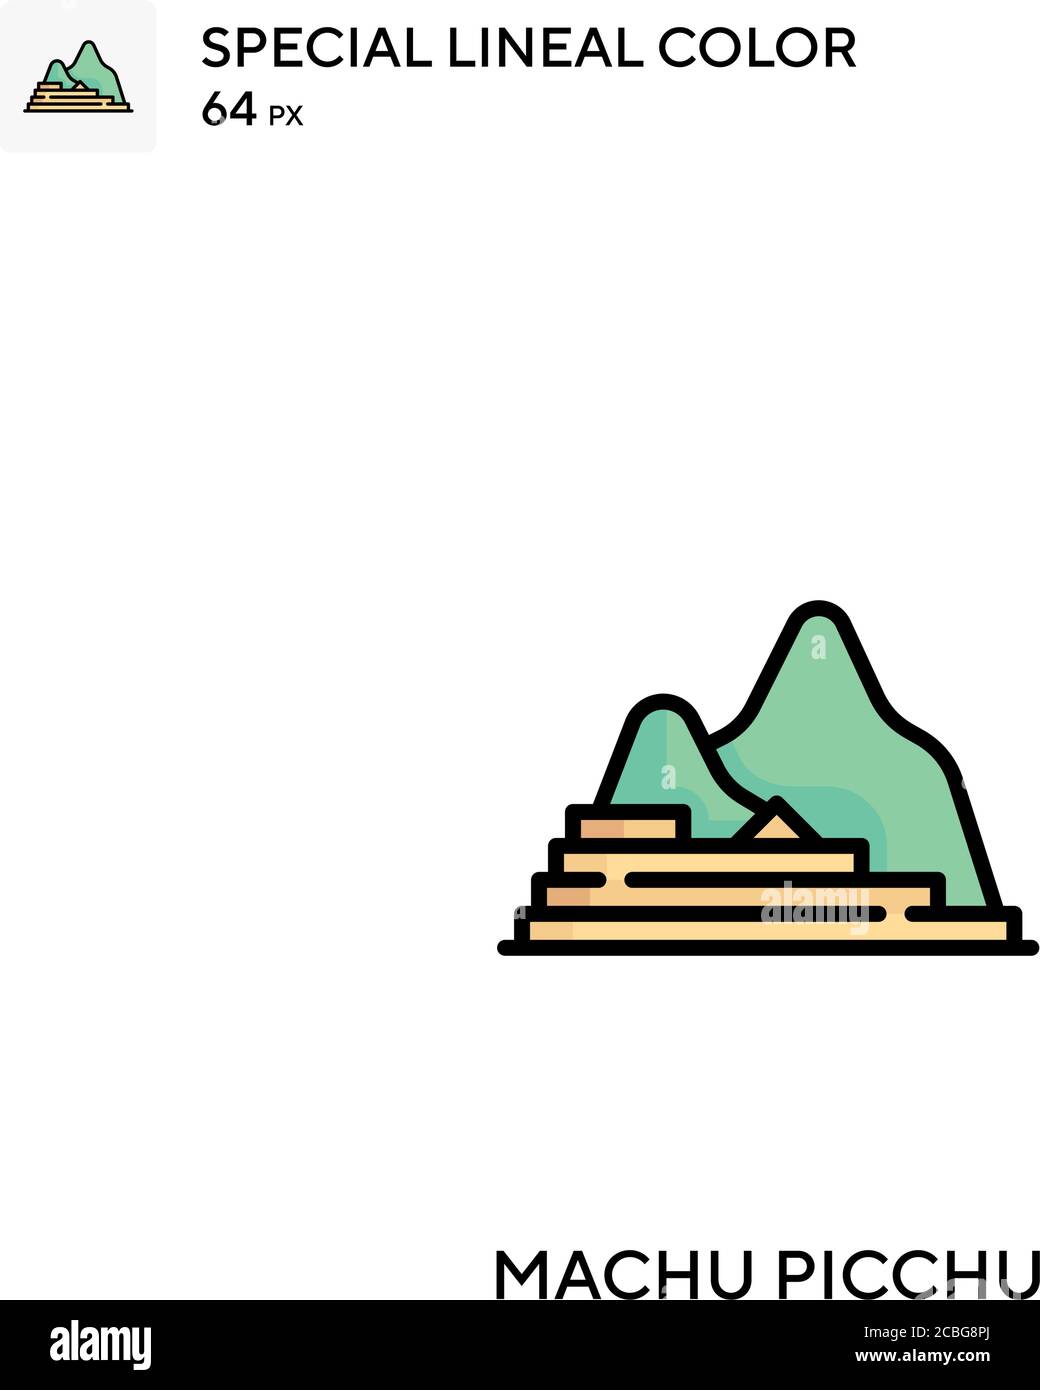 Machu picchu Simple vector icon. Machu picchu icons for your business project Stock Vector